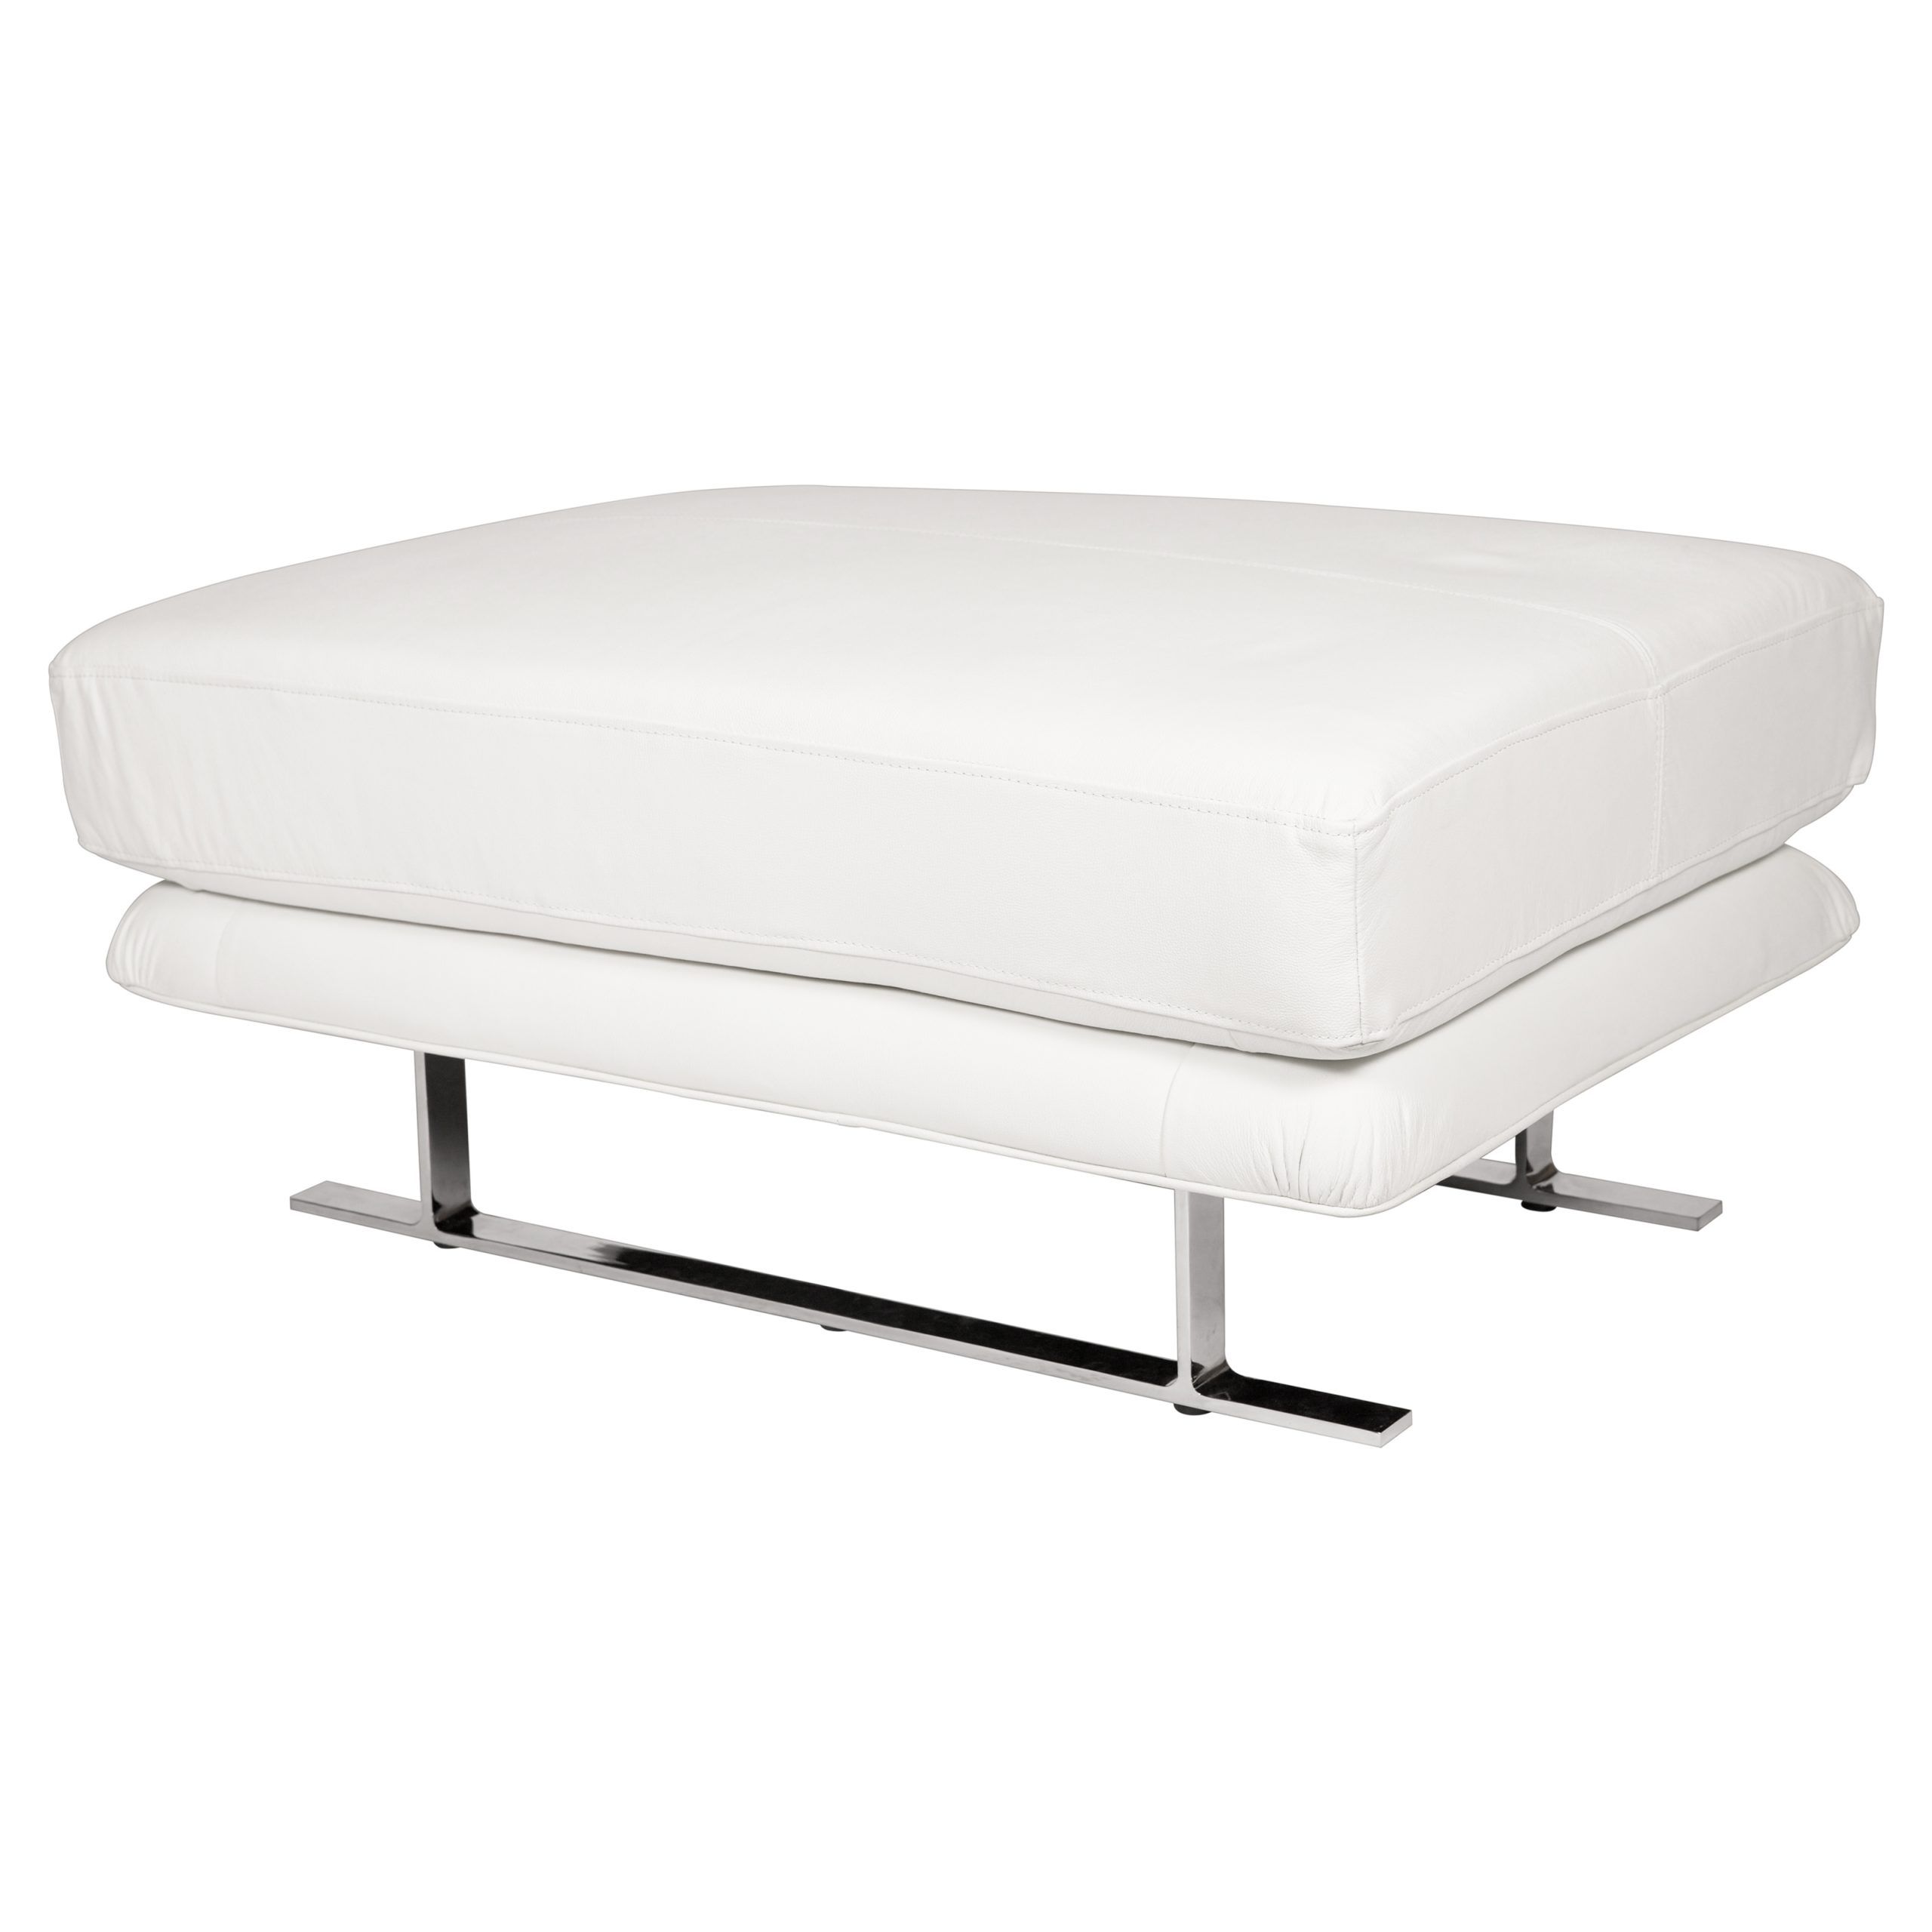 2020 White Leatherette Ottomans For Savoy Leather Ottoman With Chrome Legs – White At Hayneedle (View 8 of 10)